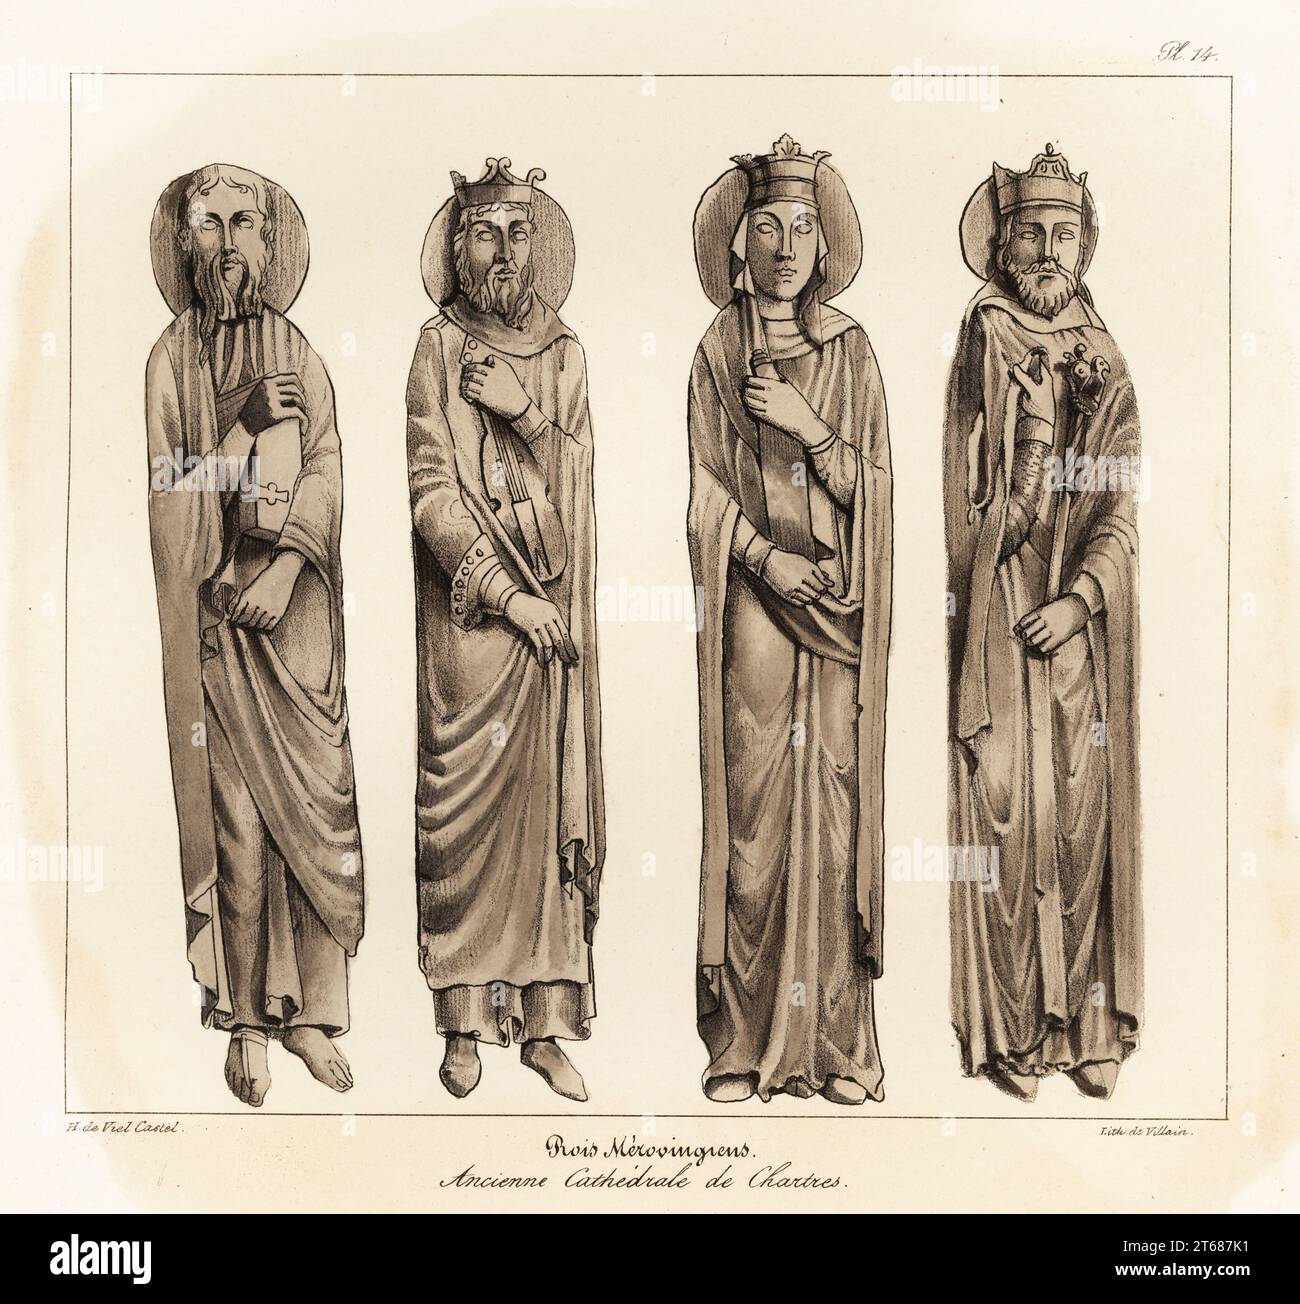 Merovingian kings from the jambs of the Royal Portal, Chartres Cathedral. Now identified as Old Testament figures. Rois Merovingiens, Ancienne Cathedrale de Chartres. Tinted lithograph by Villain after an illustration by Horace de Viel-Castel from his Collection des costumes, armes et meubles pour servir à l'histoire de la France (Collection of costumes, weapons and furniture to be used in the history of France), Treuttel & Wurtz, Bossange, 1827. Stock Photo